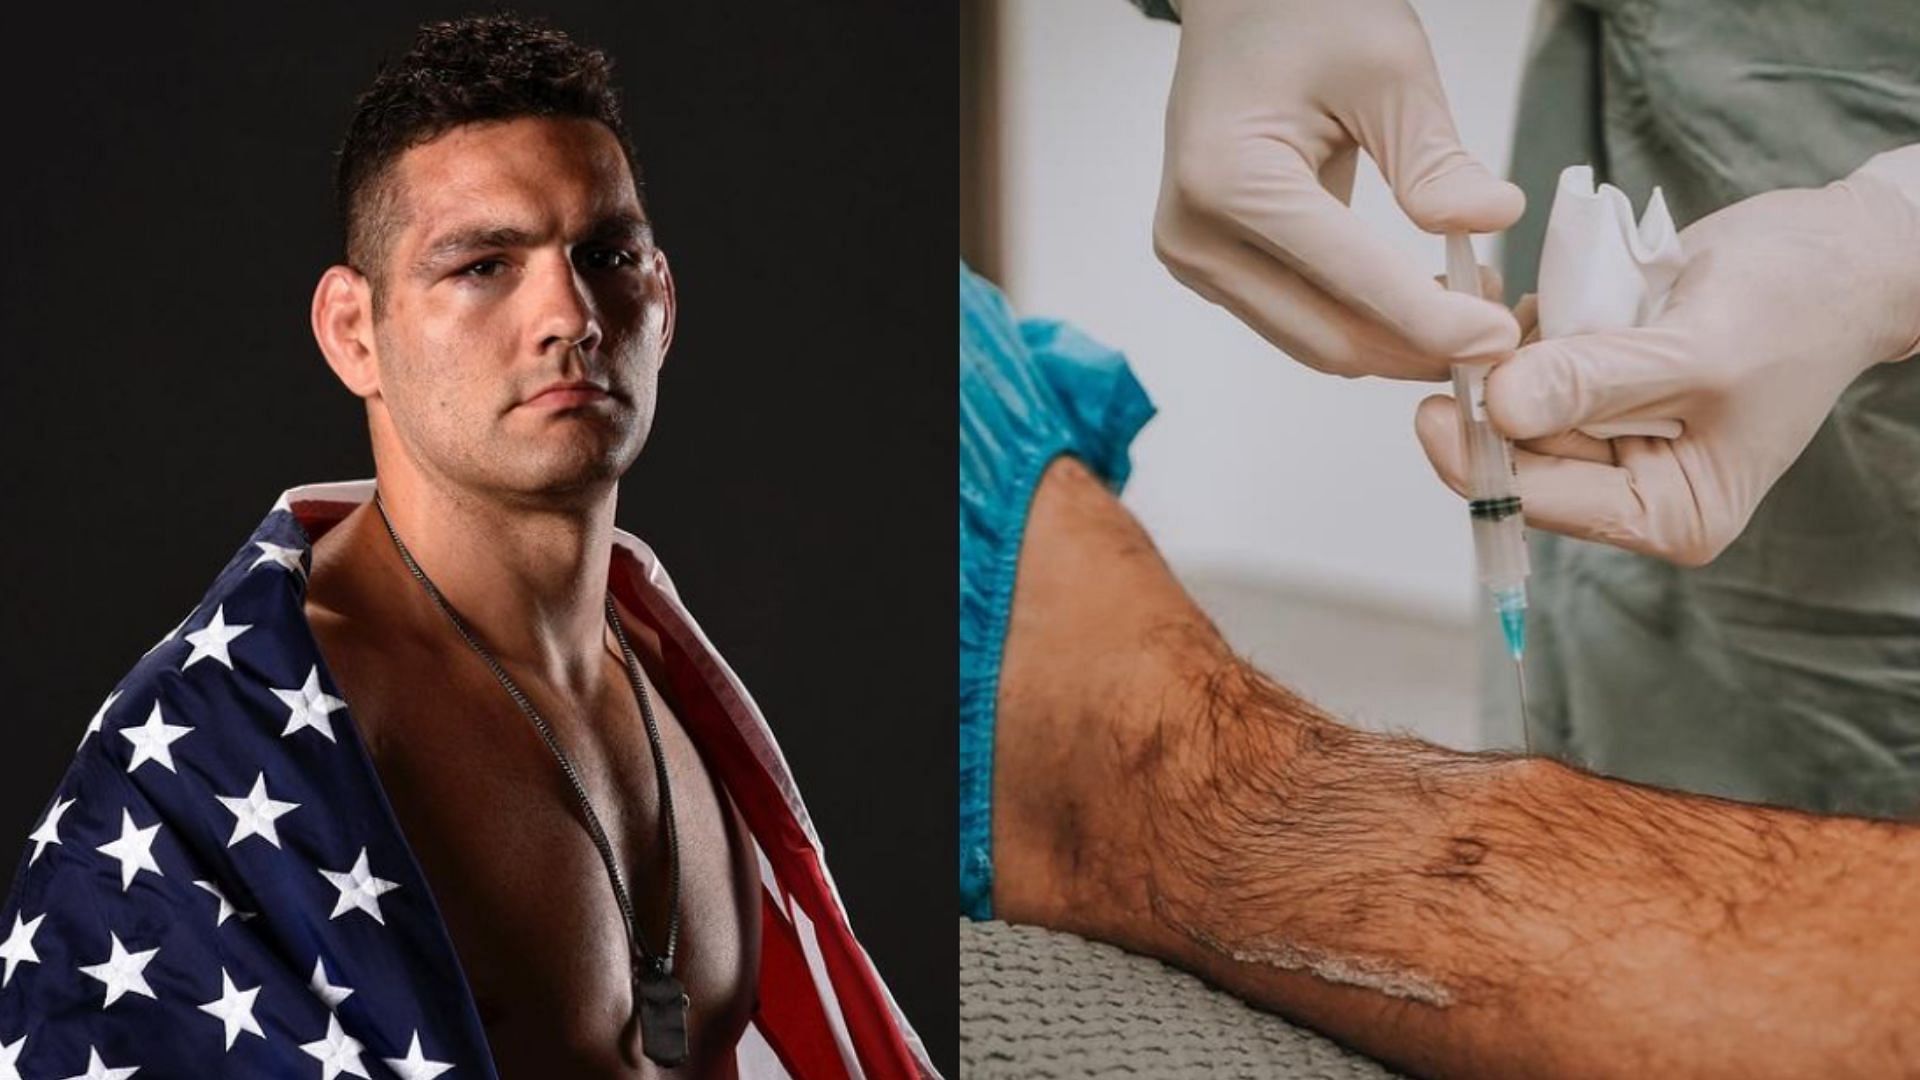 Chris Weidman has suffered multiple leg injuries during his UFC career [Images courtesy of @chrisweidman on Instagram]